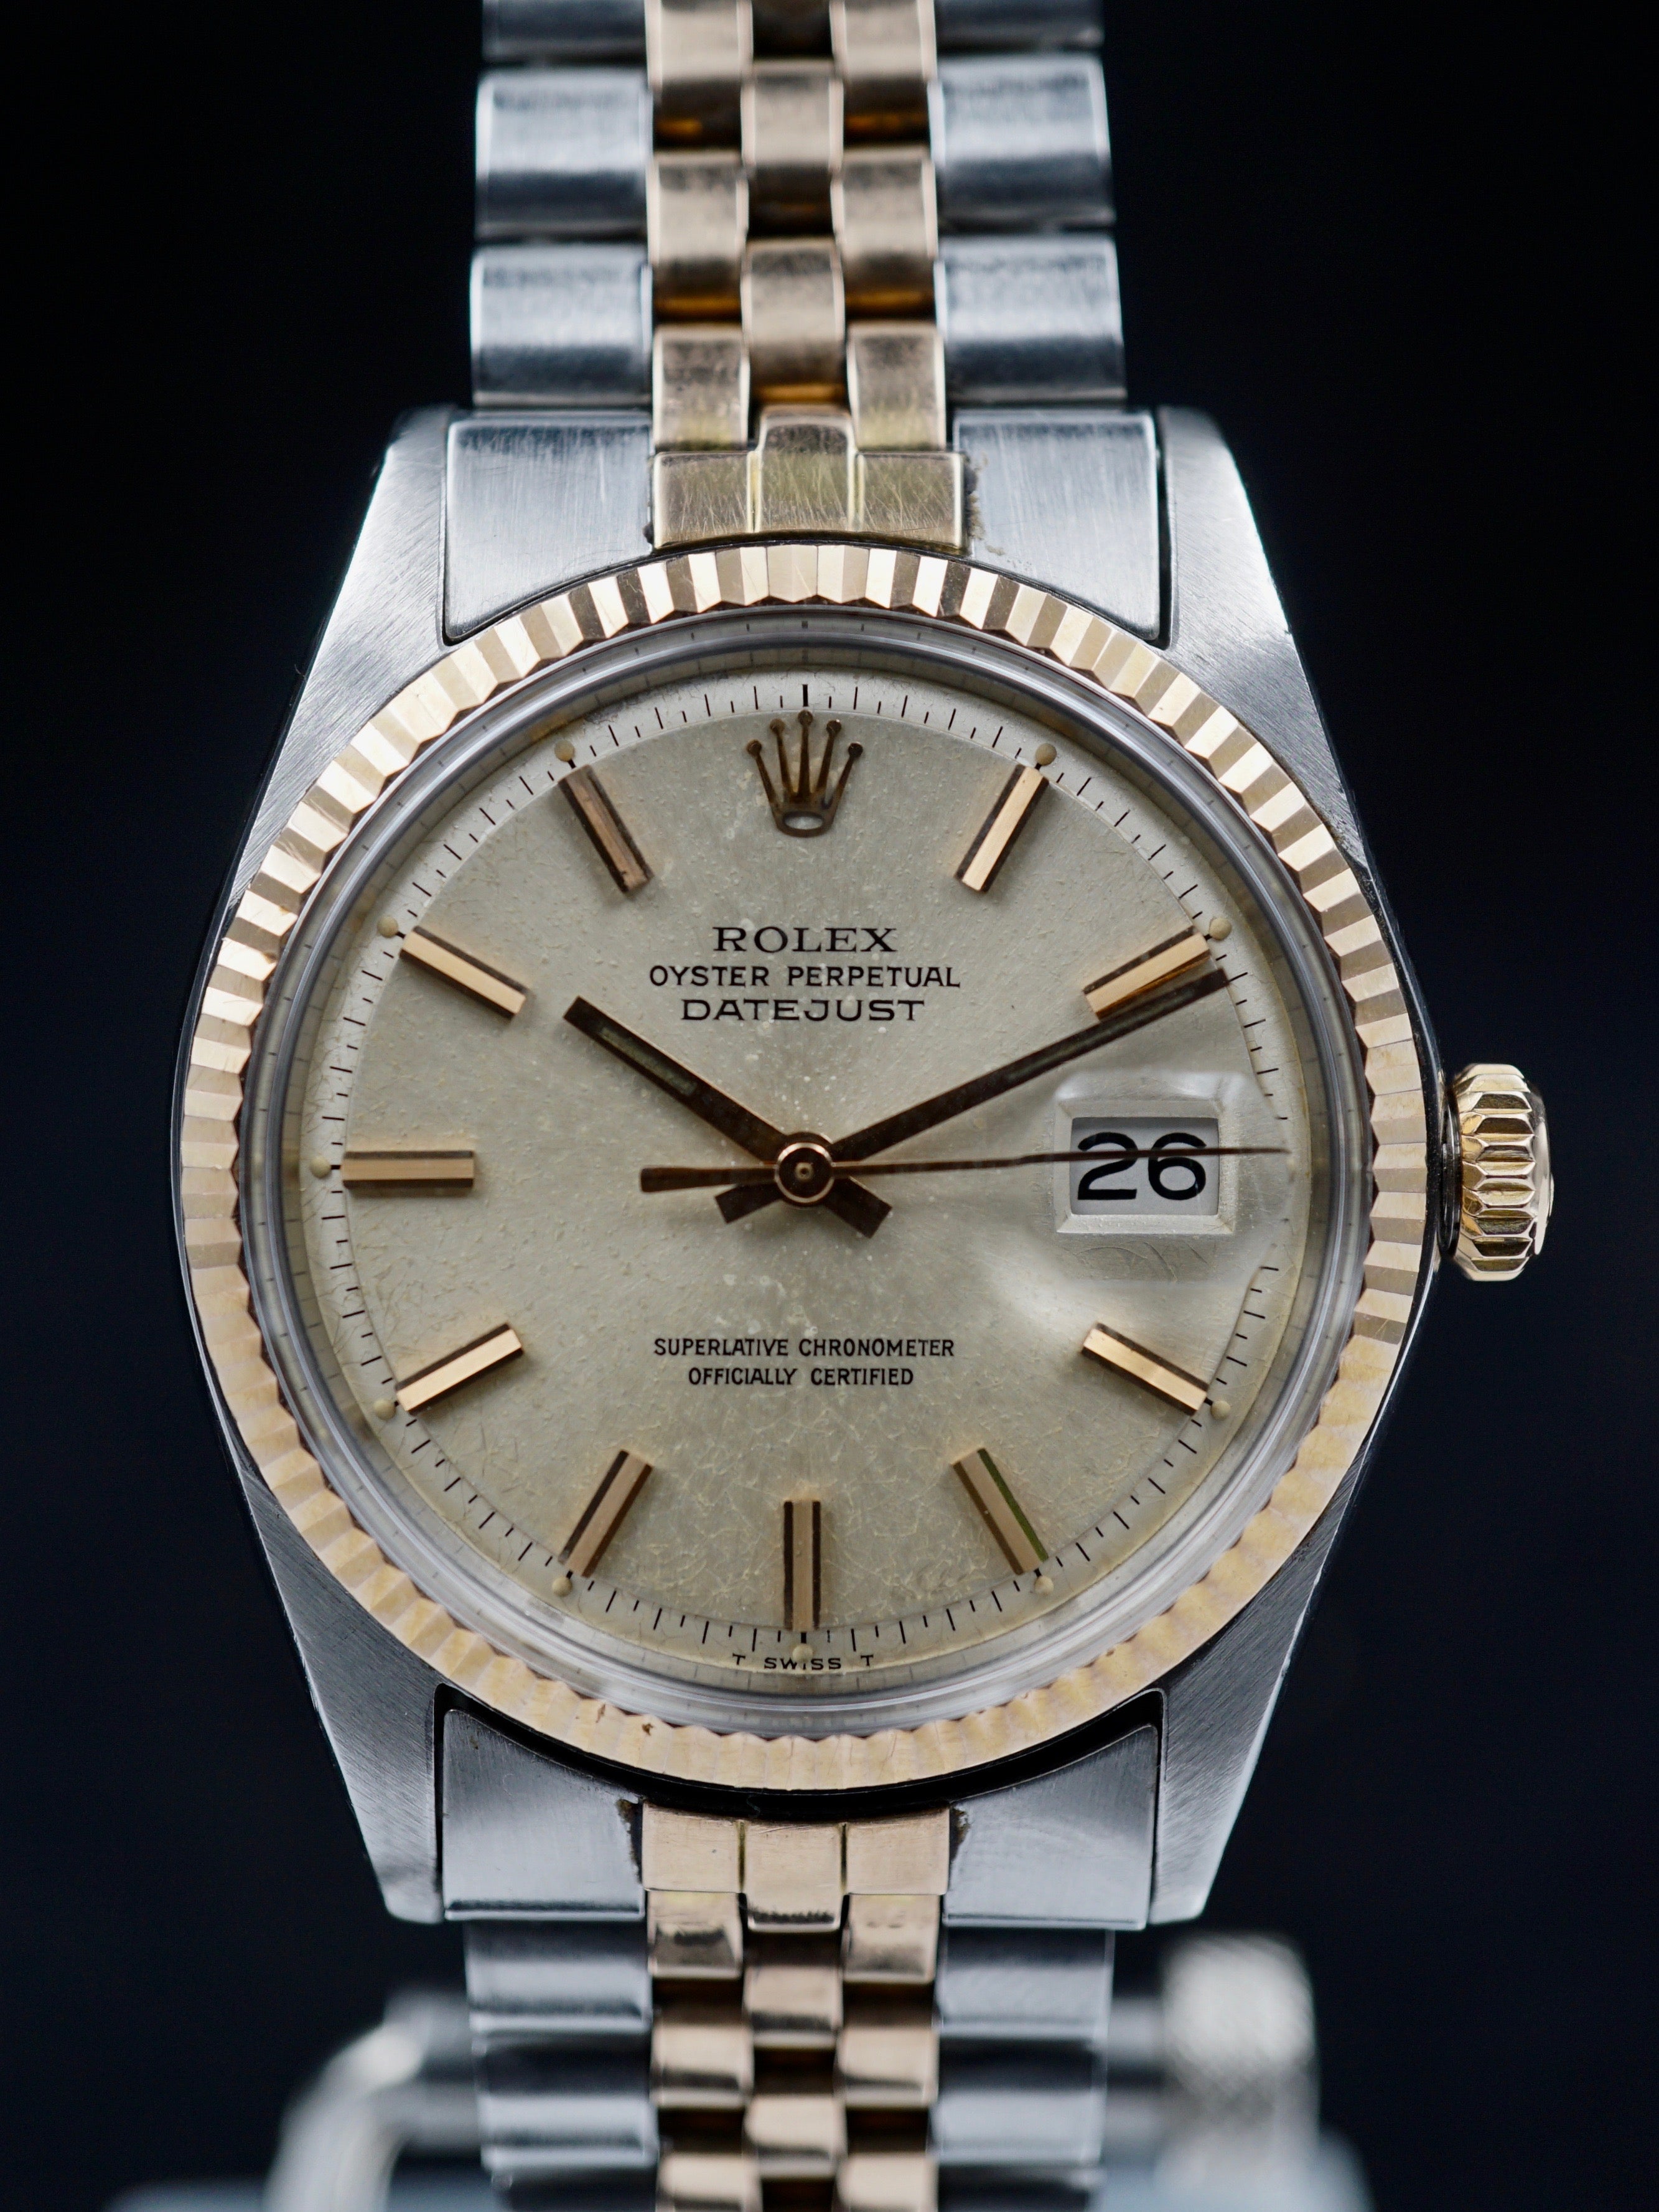 1971 Rolex Datejust Rose Gold & Stainless Steel (Ref. 1601) W/ Box and Papers